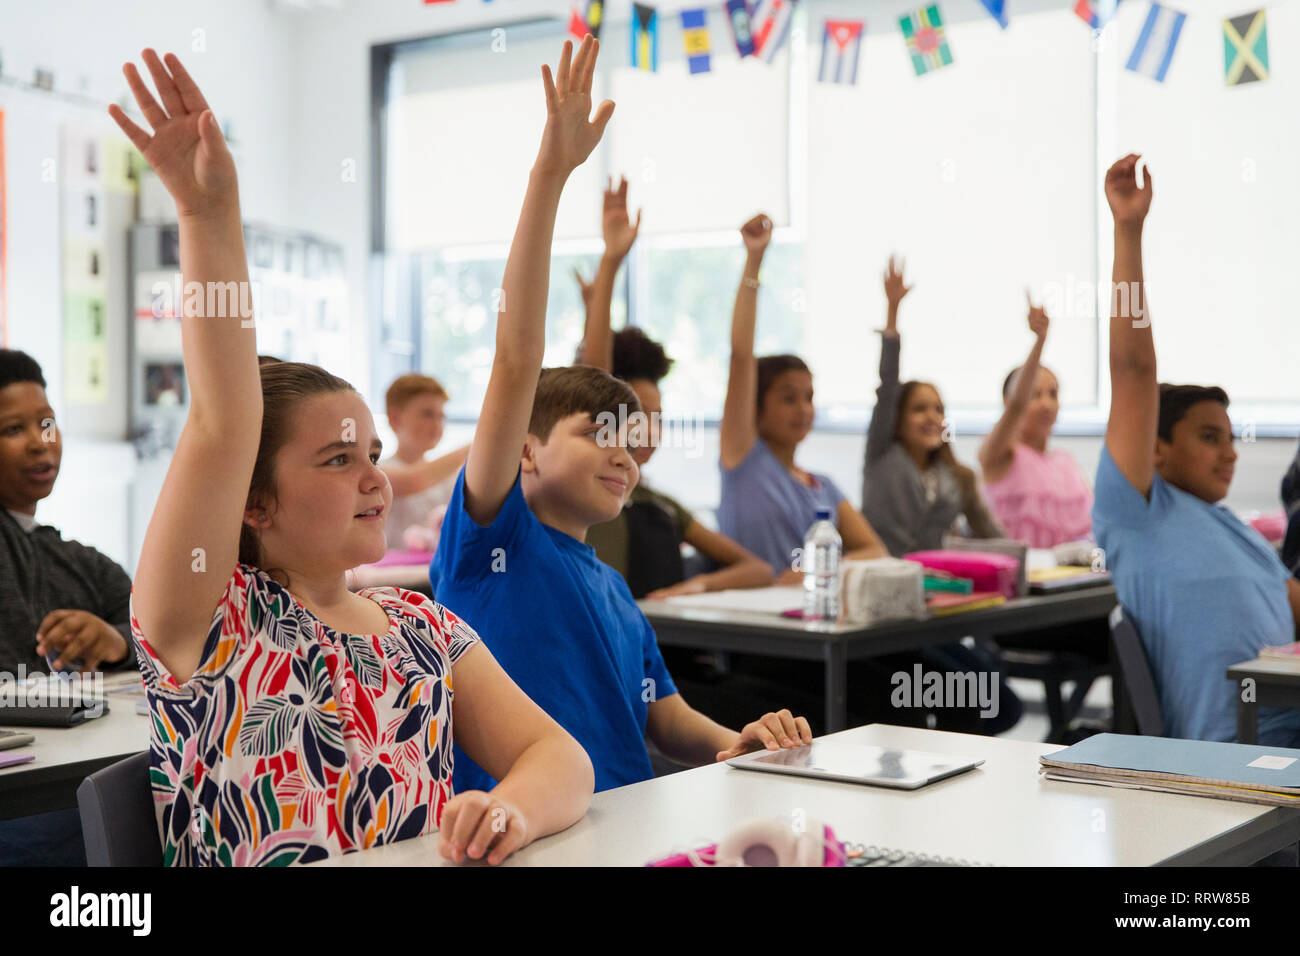 Eager junior high school students with hands raised in classroom Stock Photo